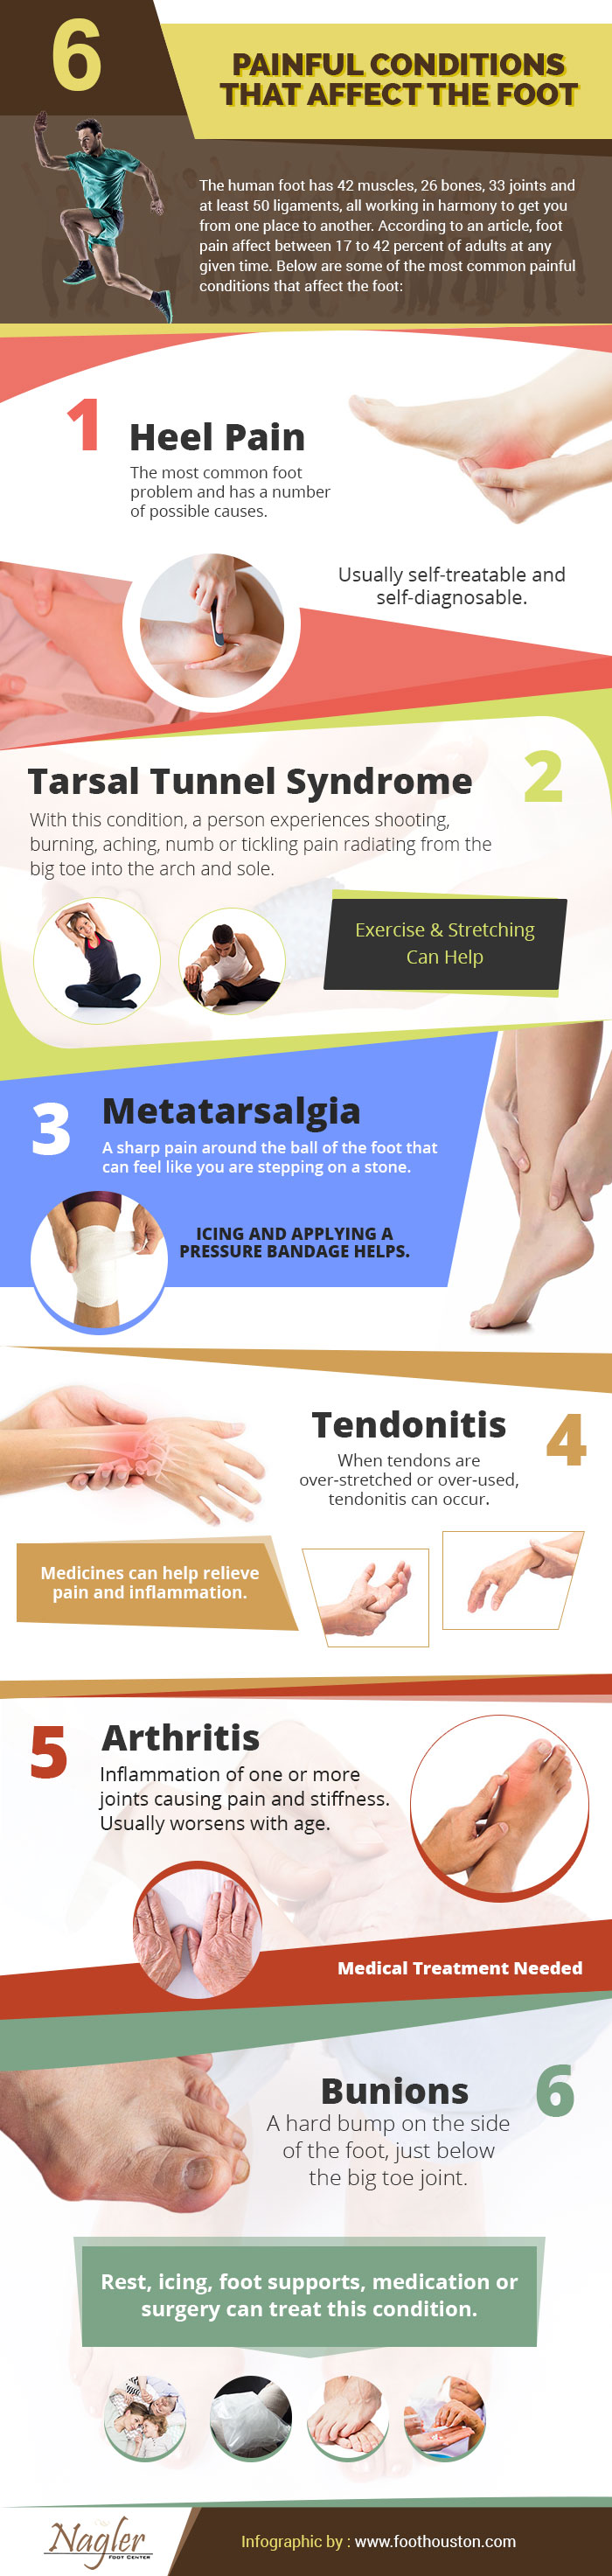 6 PAINFUL CONDITIONS THAT AFFECT THE FOOT